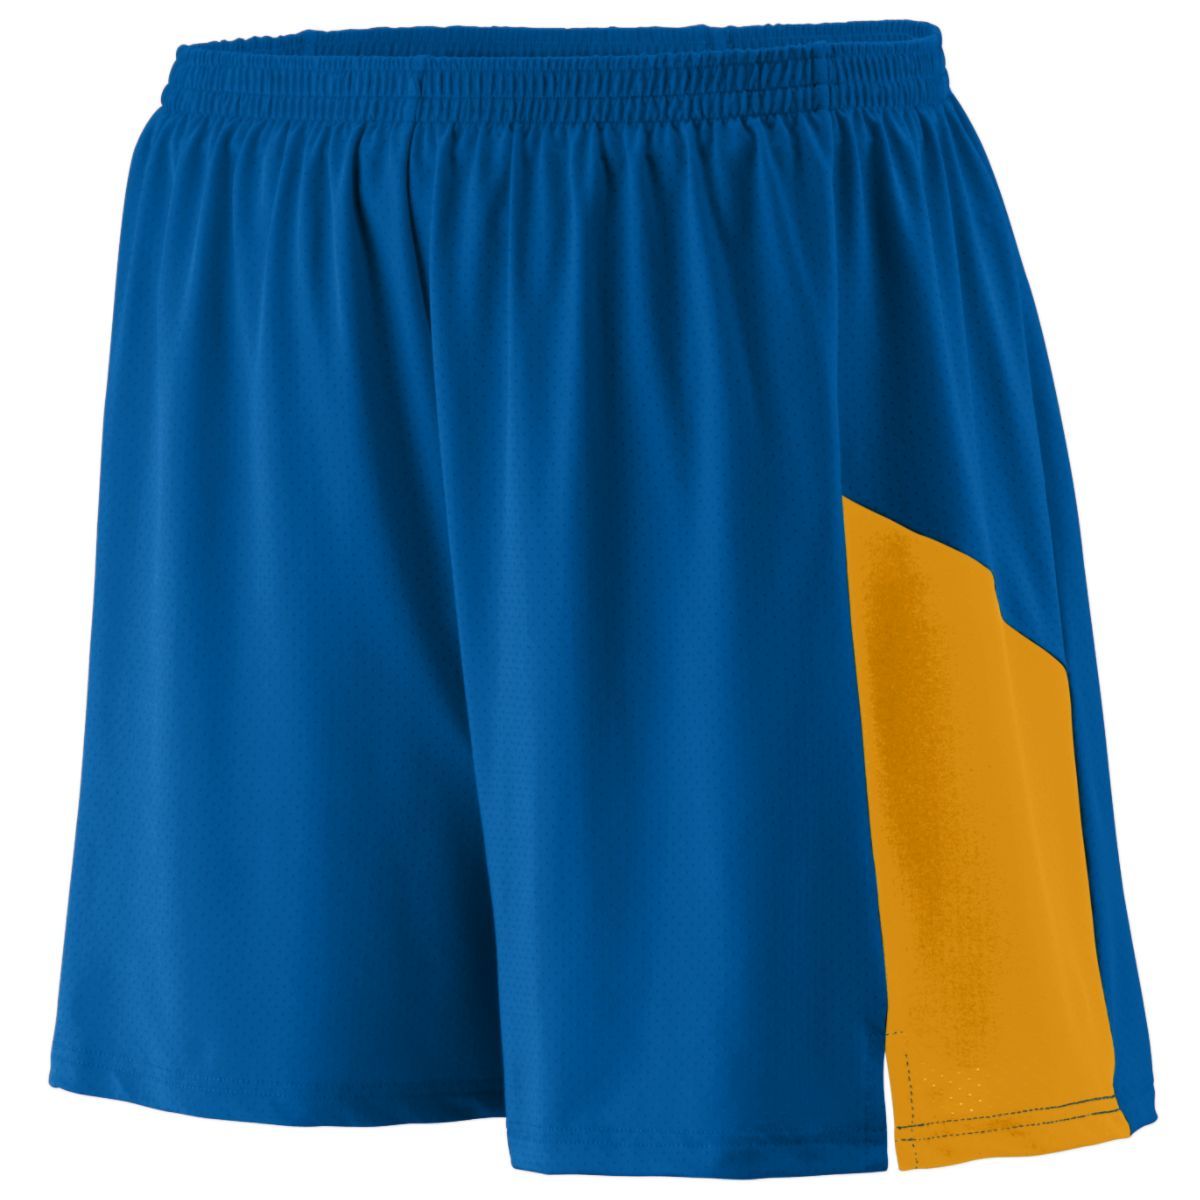 Augusta Sportswear Youth Sprint Shorts in Royal/Gold  -Part of the Youth, Youth-Shorts, Augusta-Products, Track-Field product lines at KanaleyCreations.com